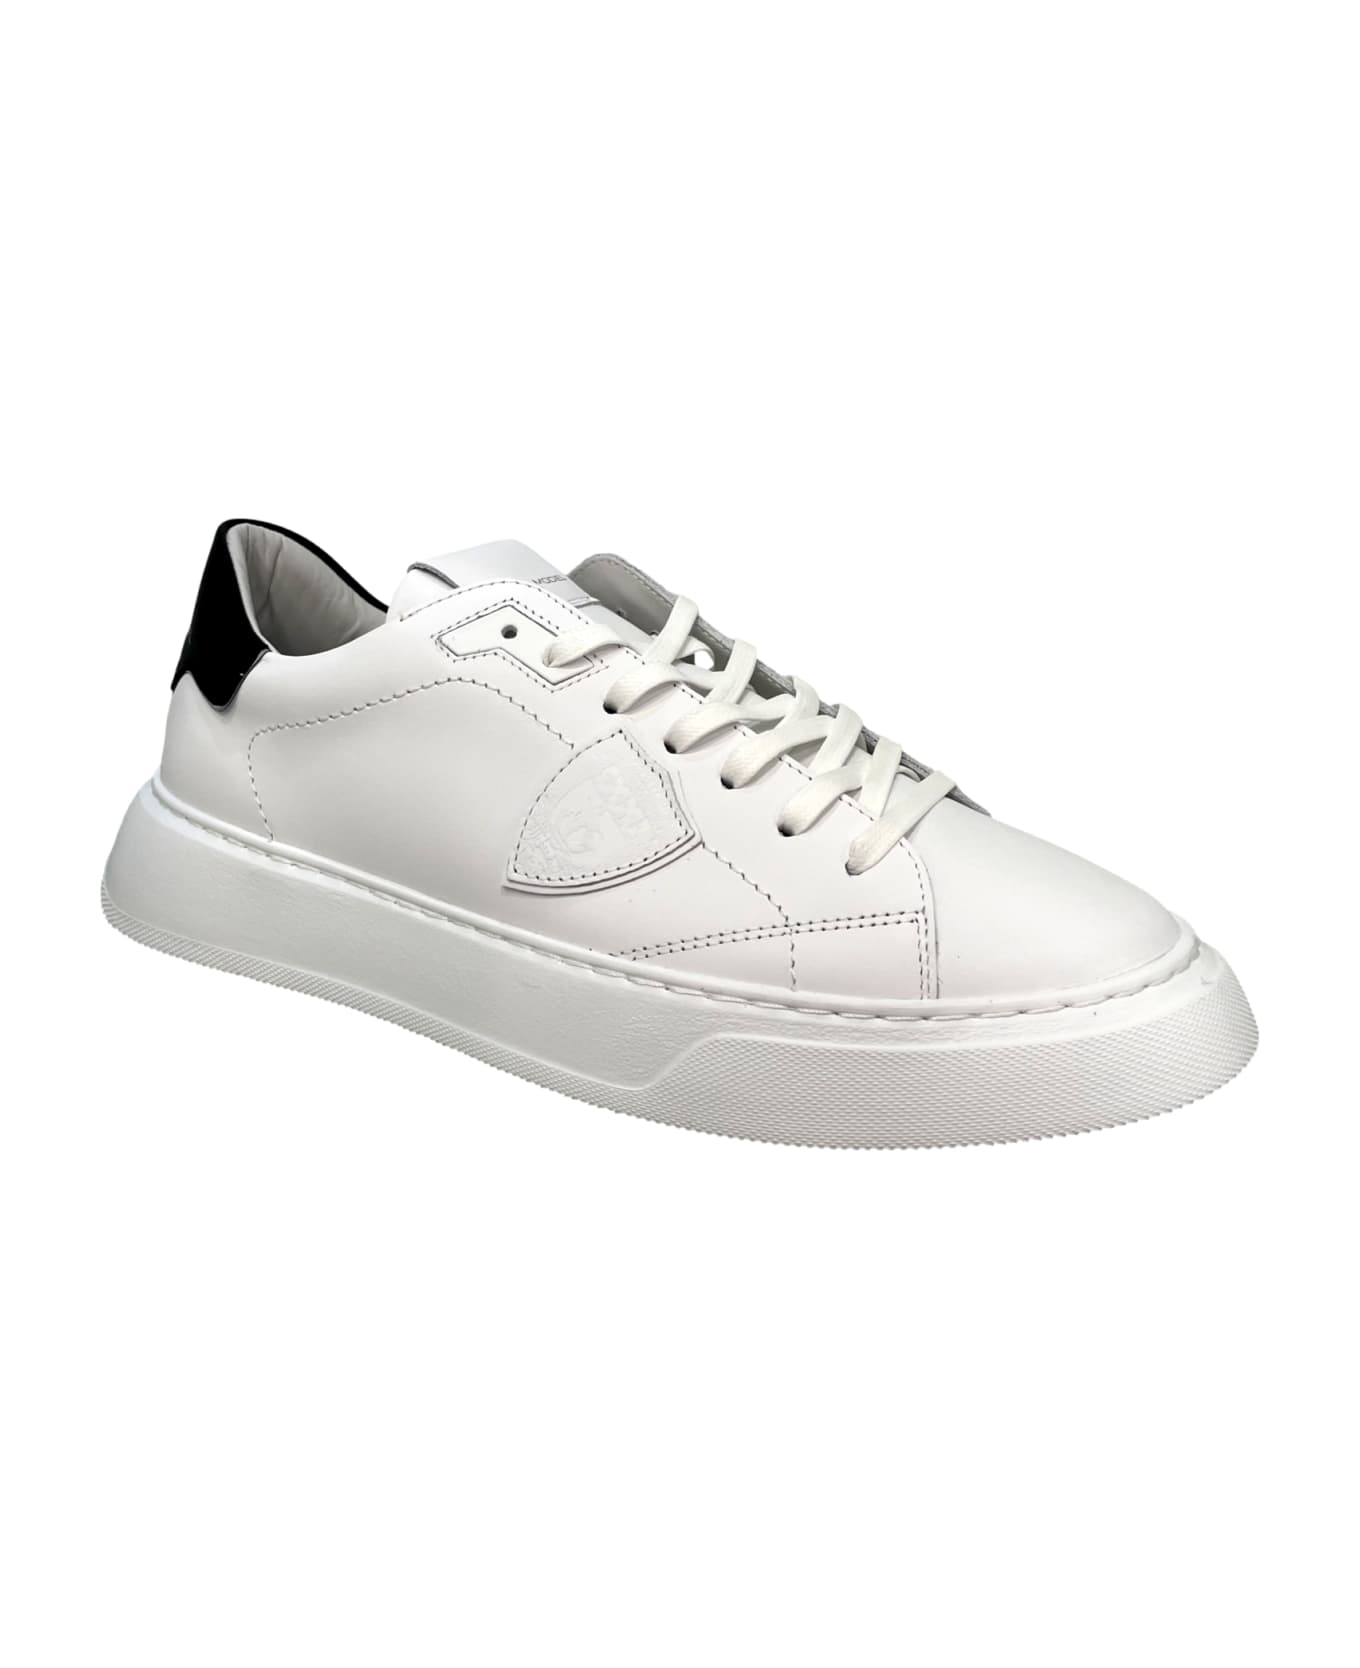 Philippe Model Temple Sneakers - White